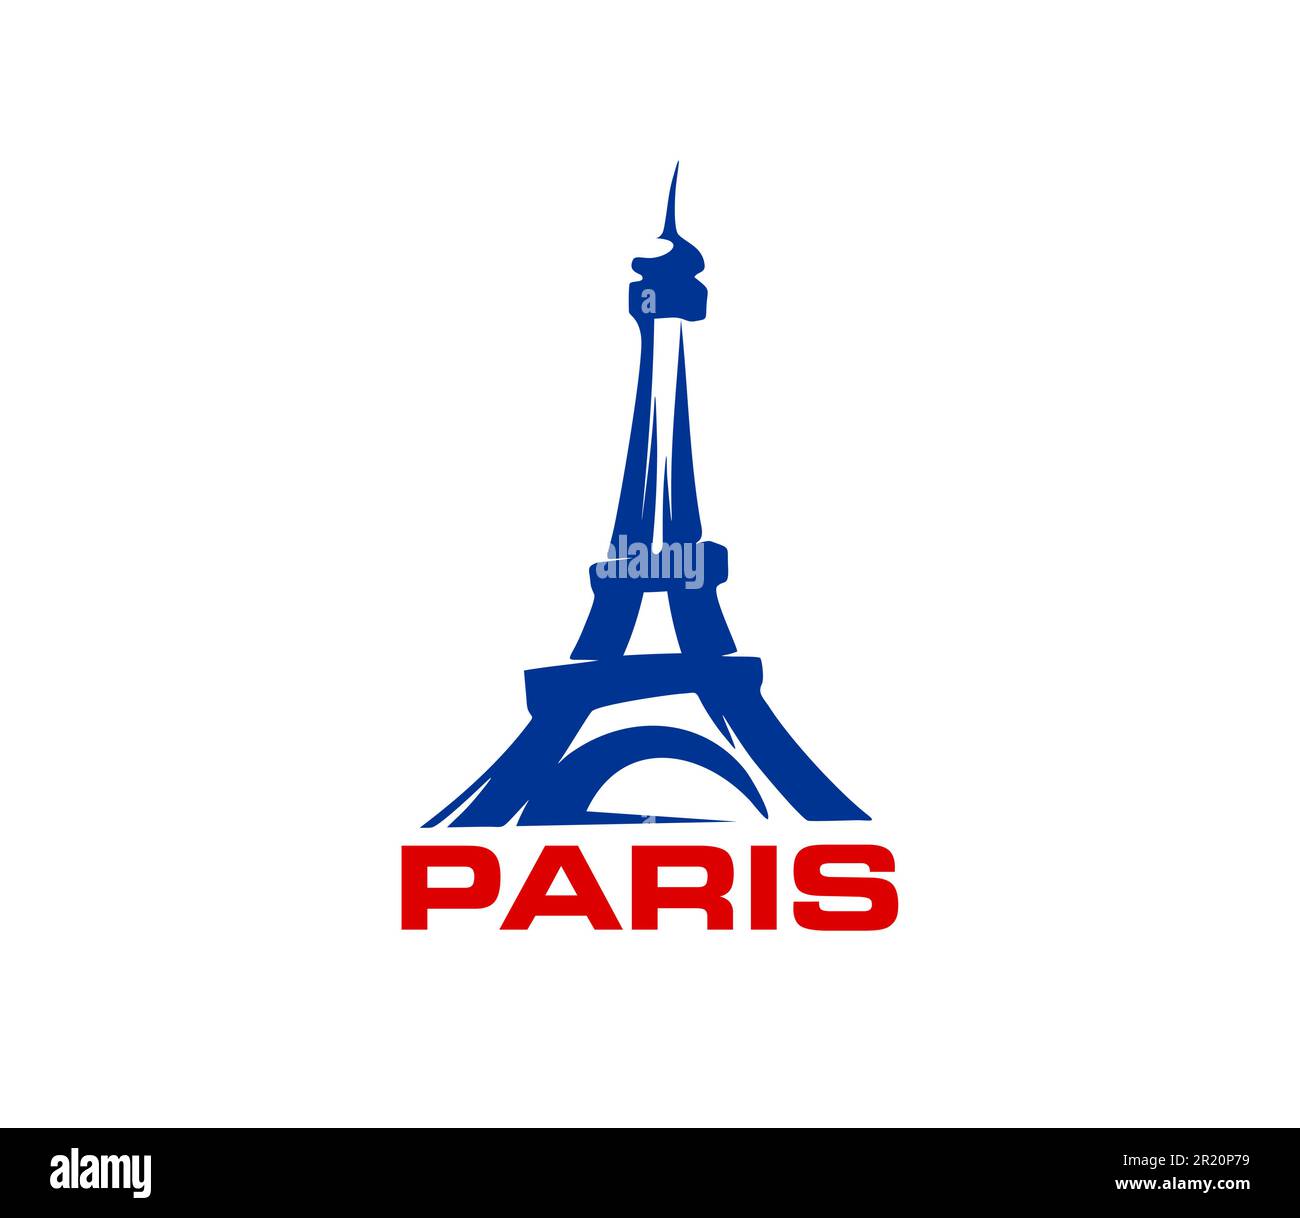 Paris Eiffel tower icon, France travel and tourism landmark symbol, vector badge. French culture and architecture symbol of Eiffel tower for Paris city tours, tourism agency or premium brand sign Stock Vector